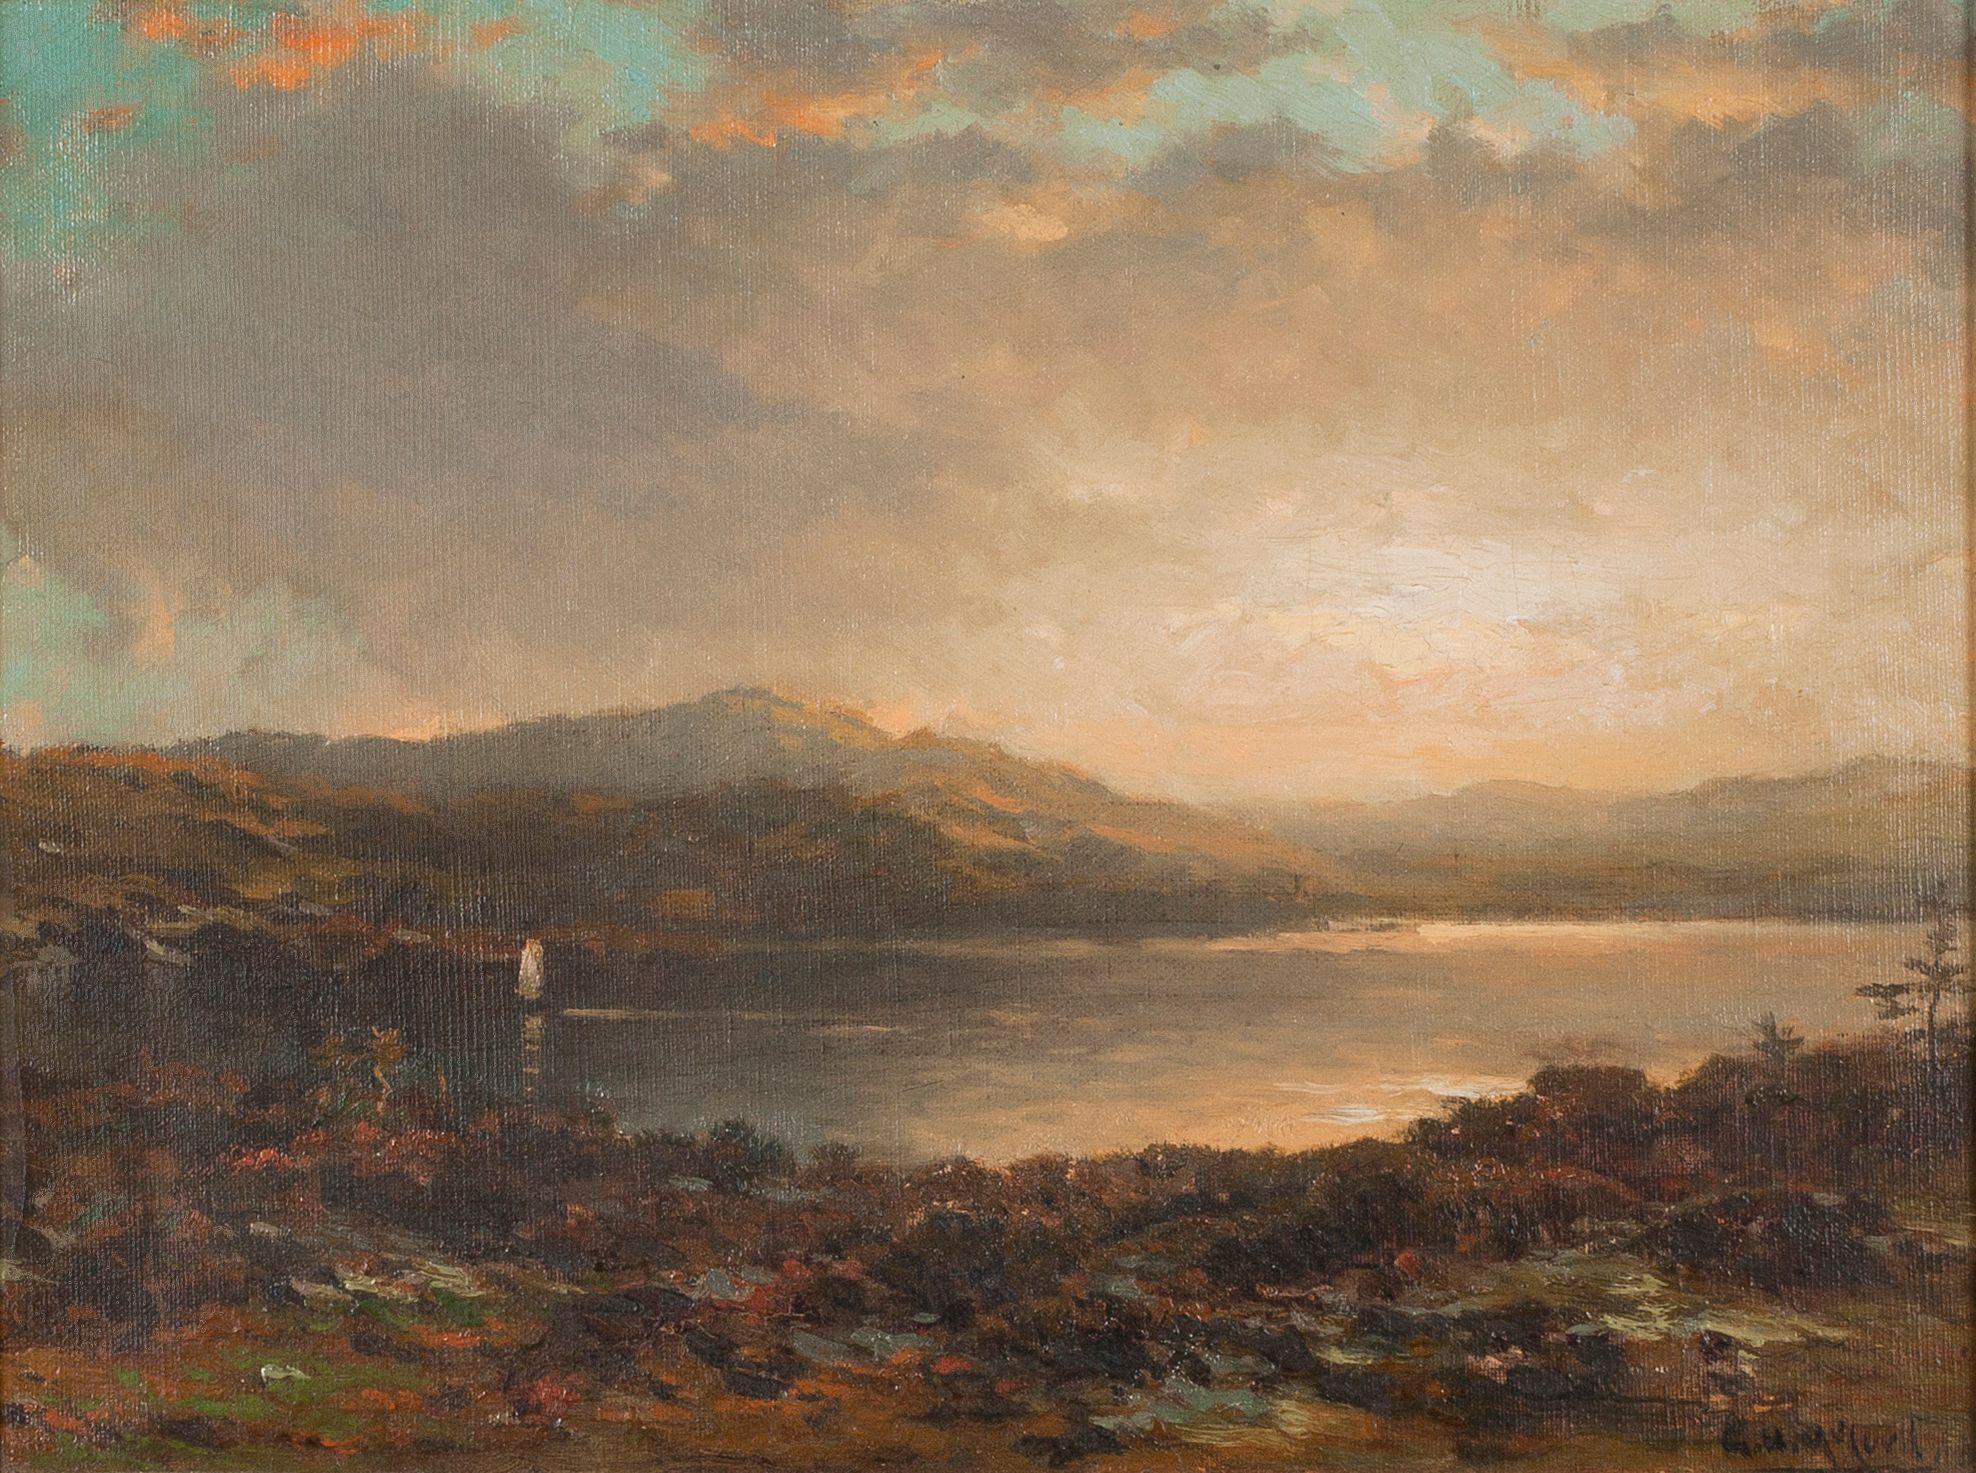 George Herbert McCord (1848-1909)
Sunset Over Lake George
Oil on canvas
12 x 16 ¼ inches
Signed lower right